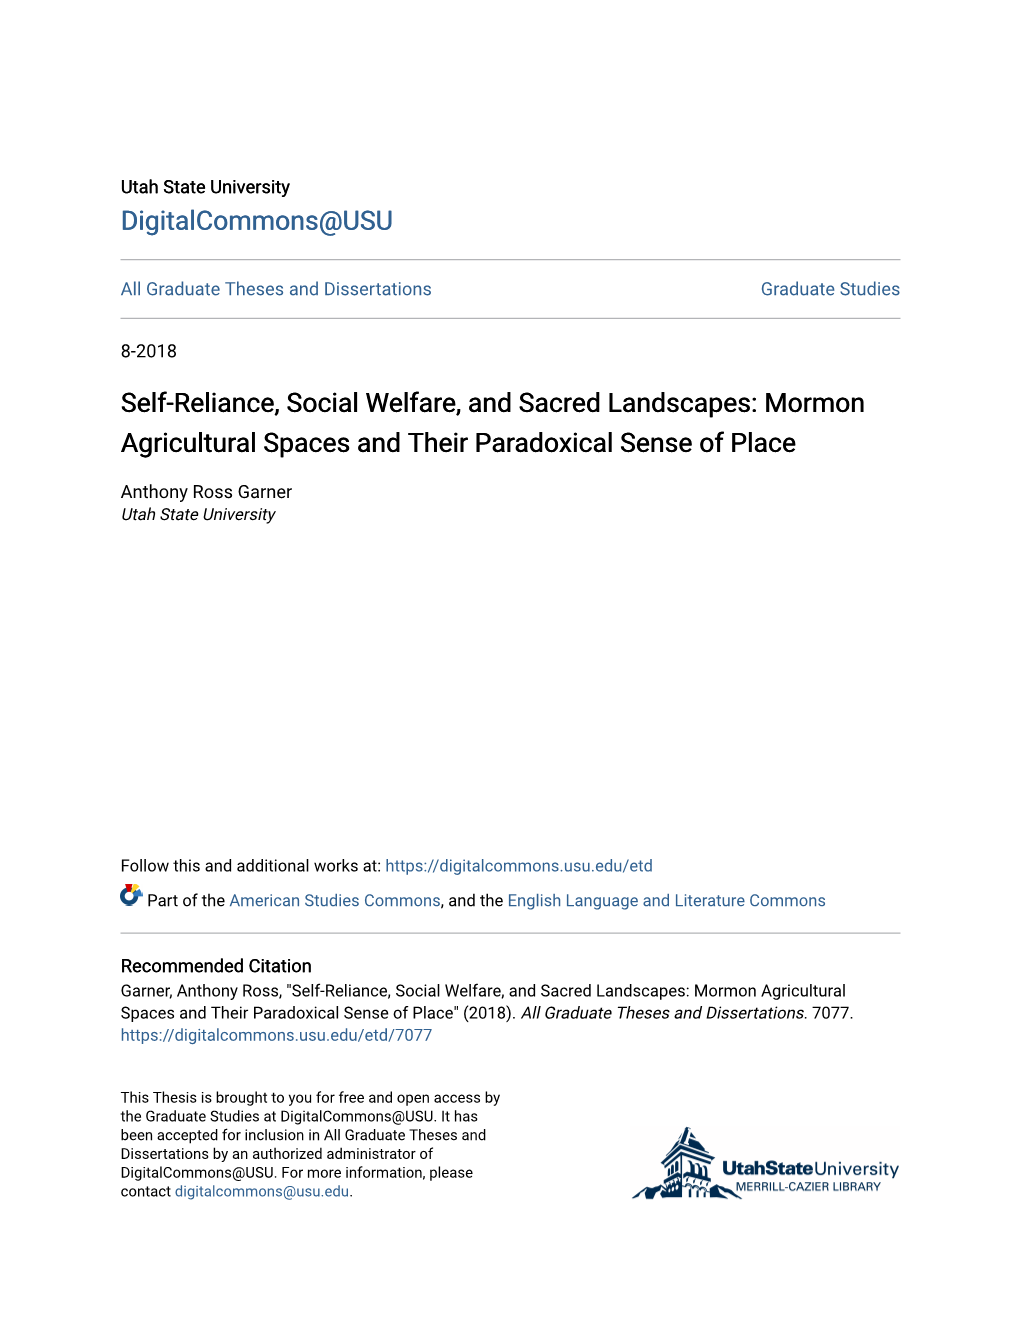 Self-Reliance, Social Welfare, and Sacred Landscapes: Mormon Agricultural Spaces and Their Paradoxical Sense of Place